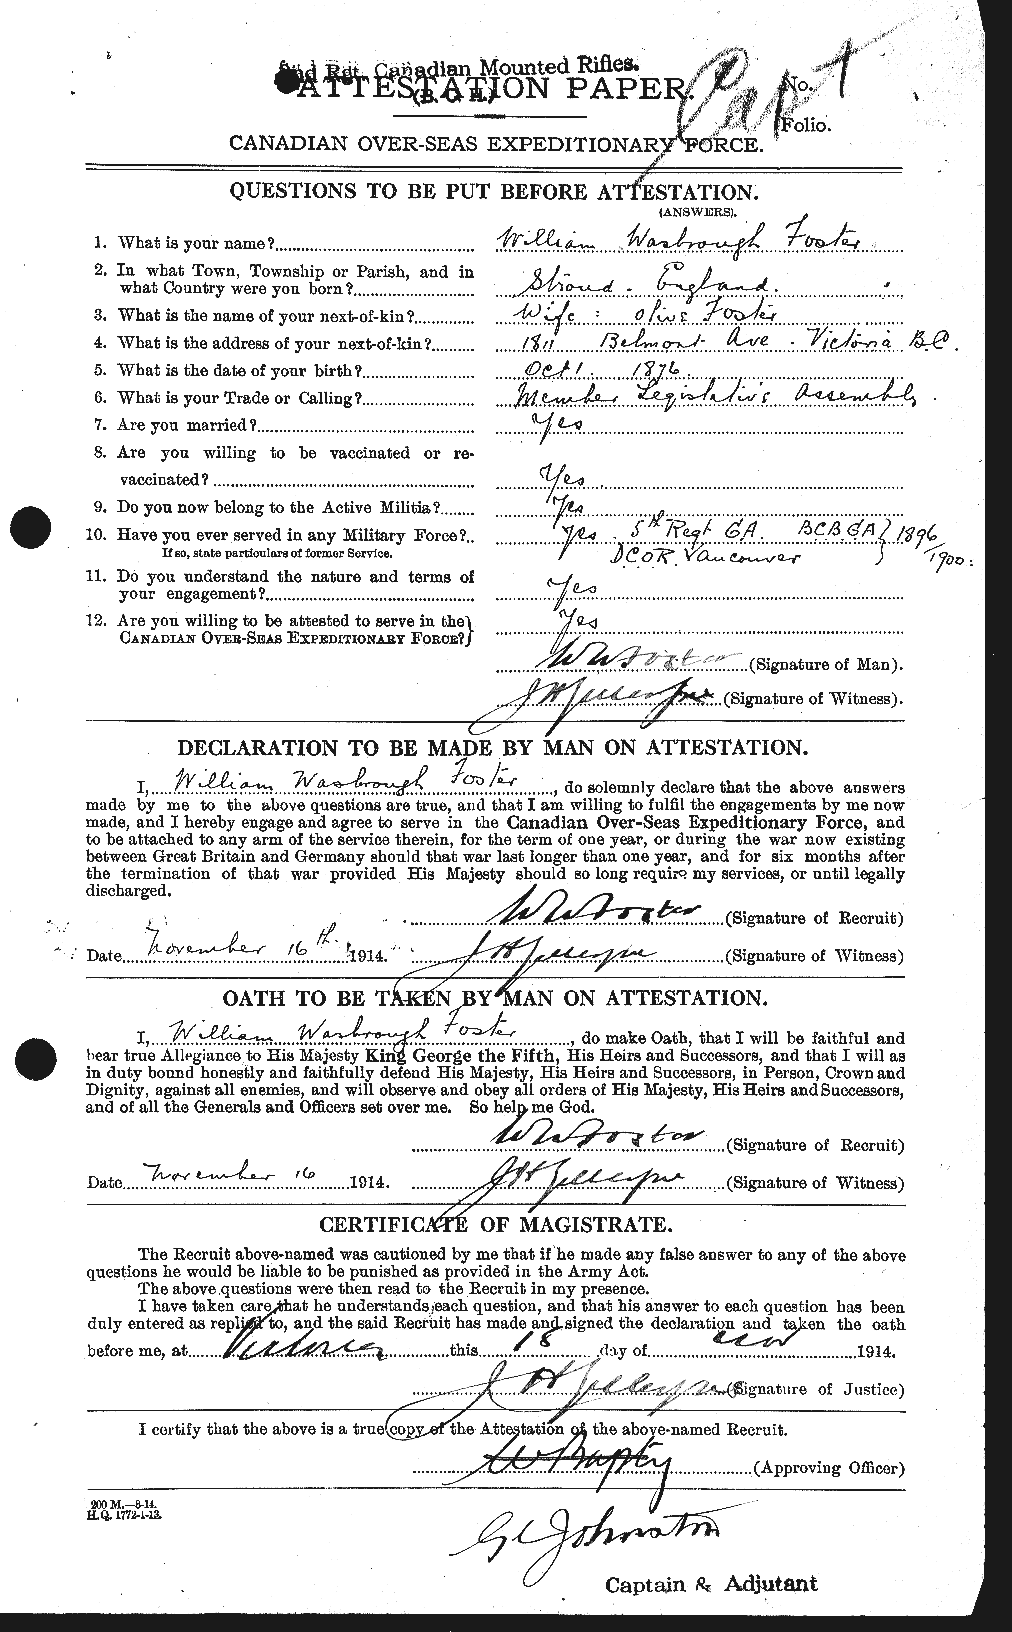 Personnel Records of the First World War - CEF 328776a